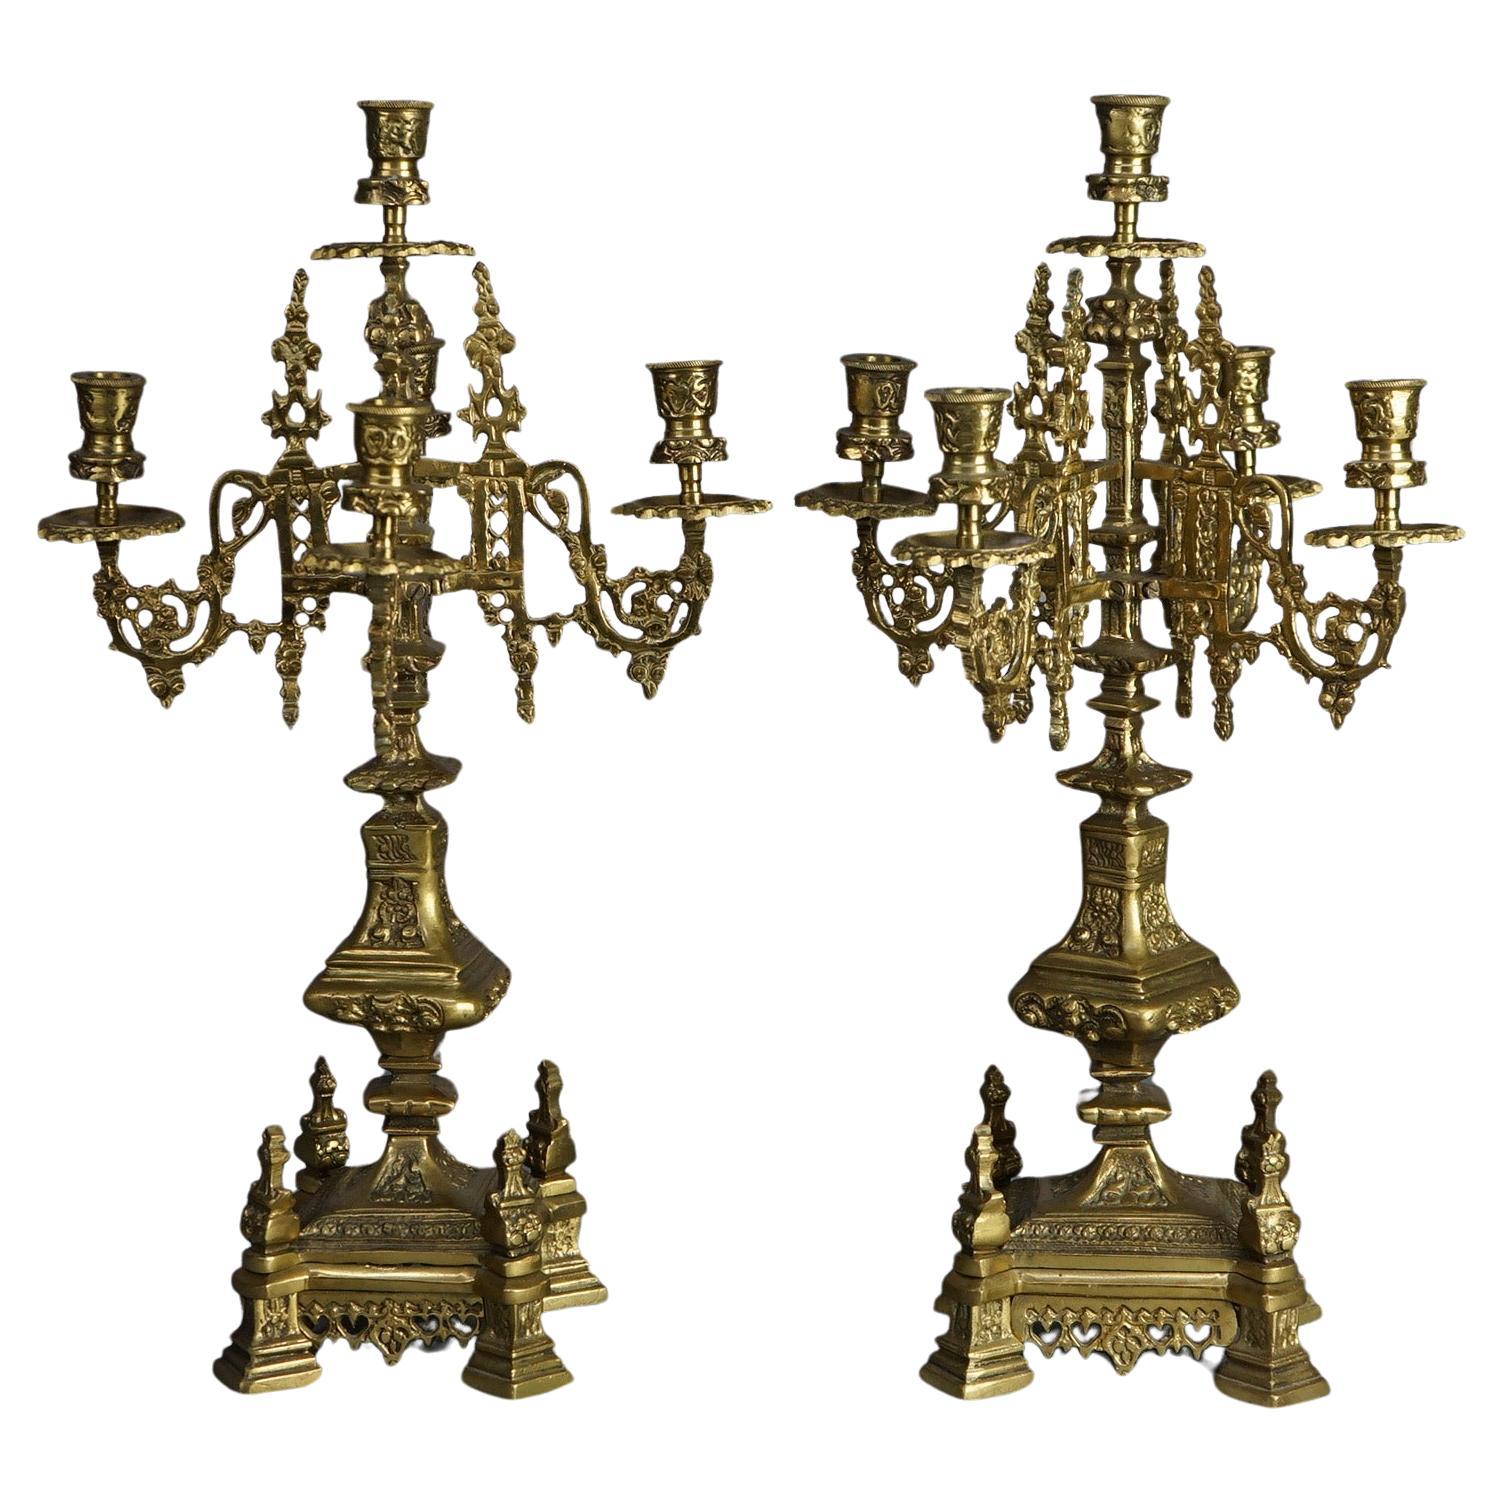 Antique Pair Gothic Revival Bronzed Five-Light & Footed Candelabra C1850 For Sale